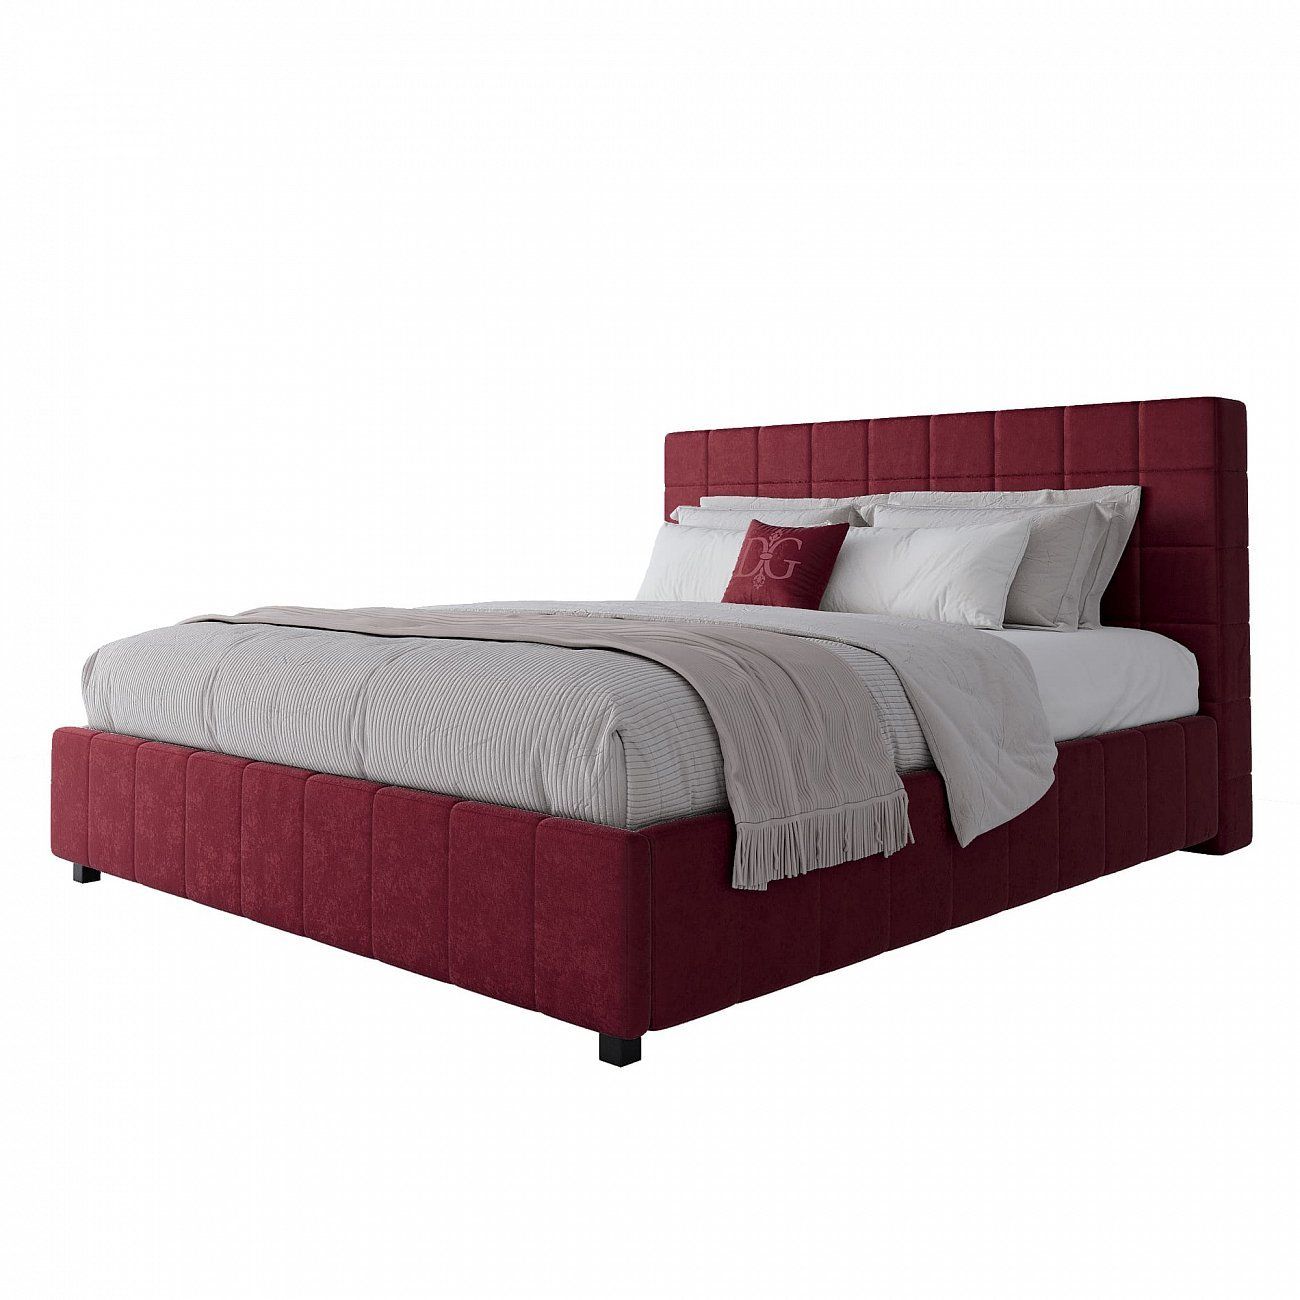 Double bed 180x200 cm red Shining Modern